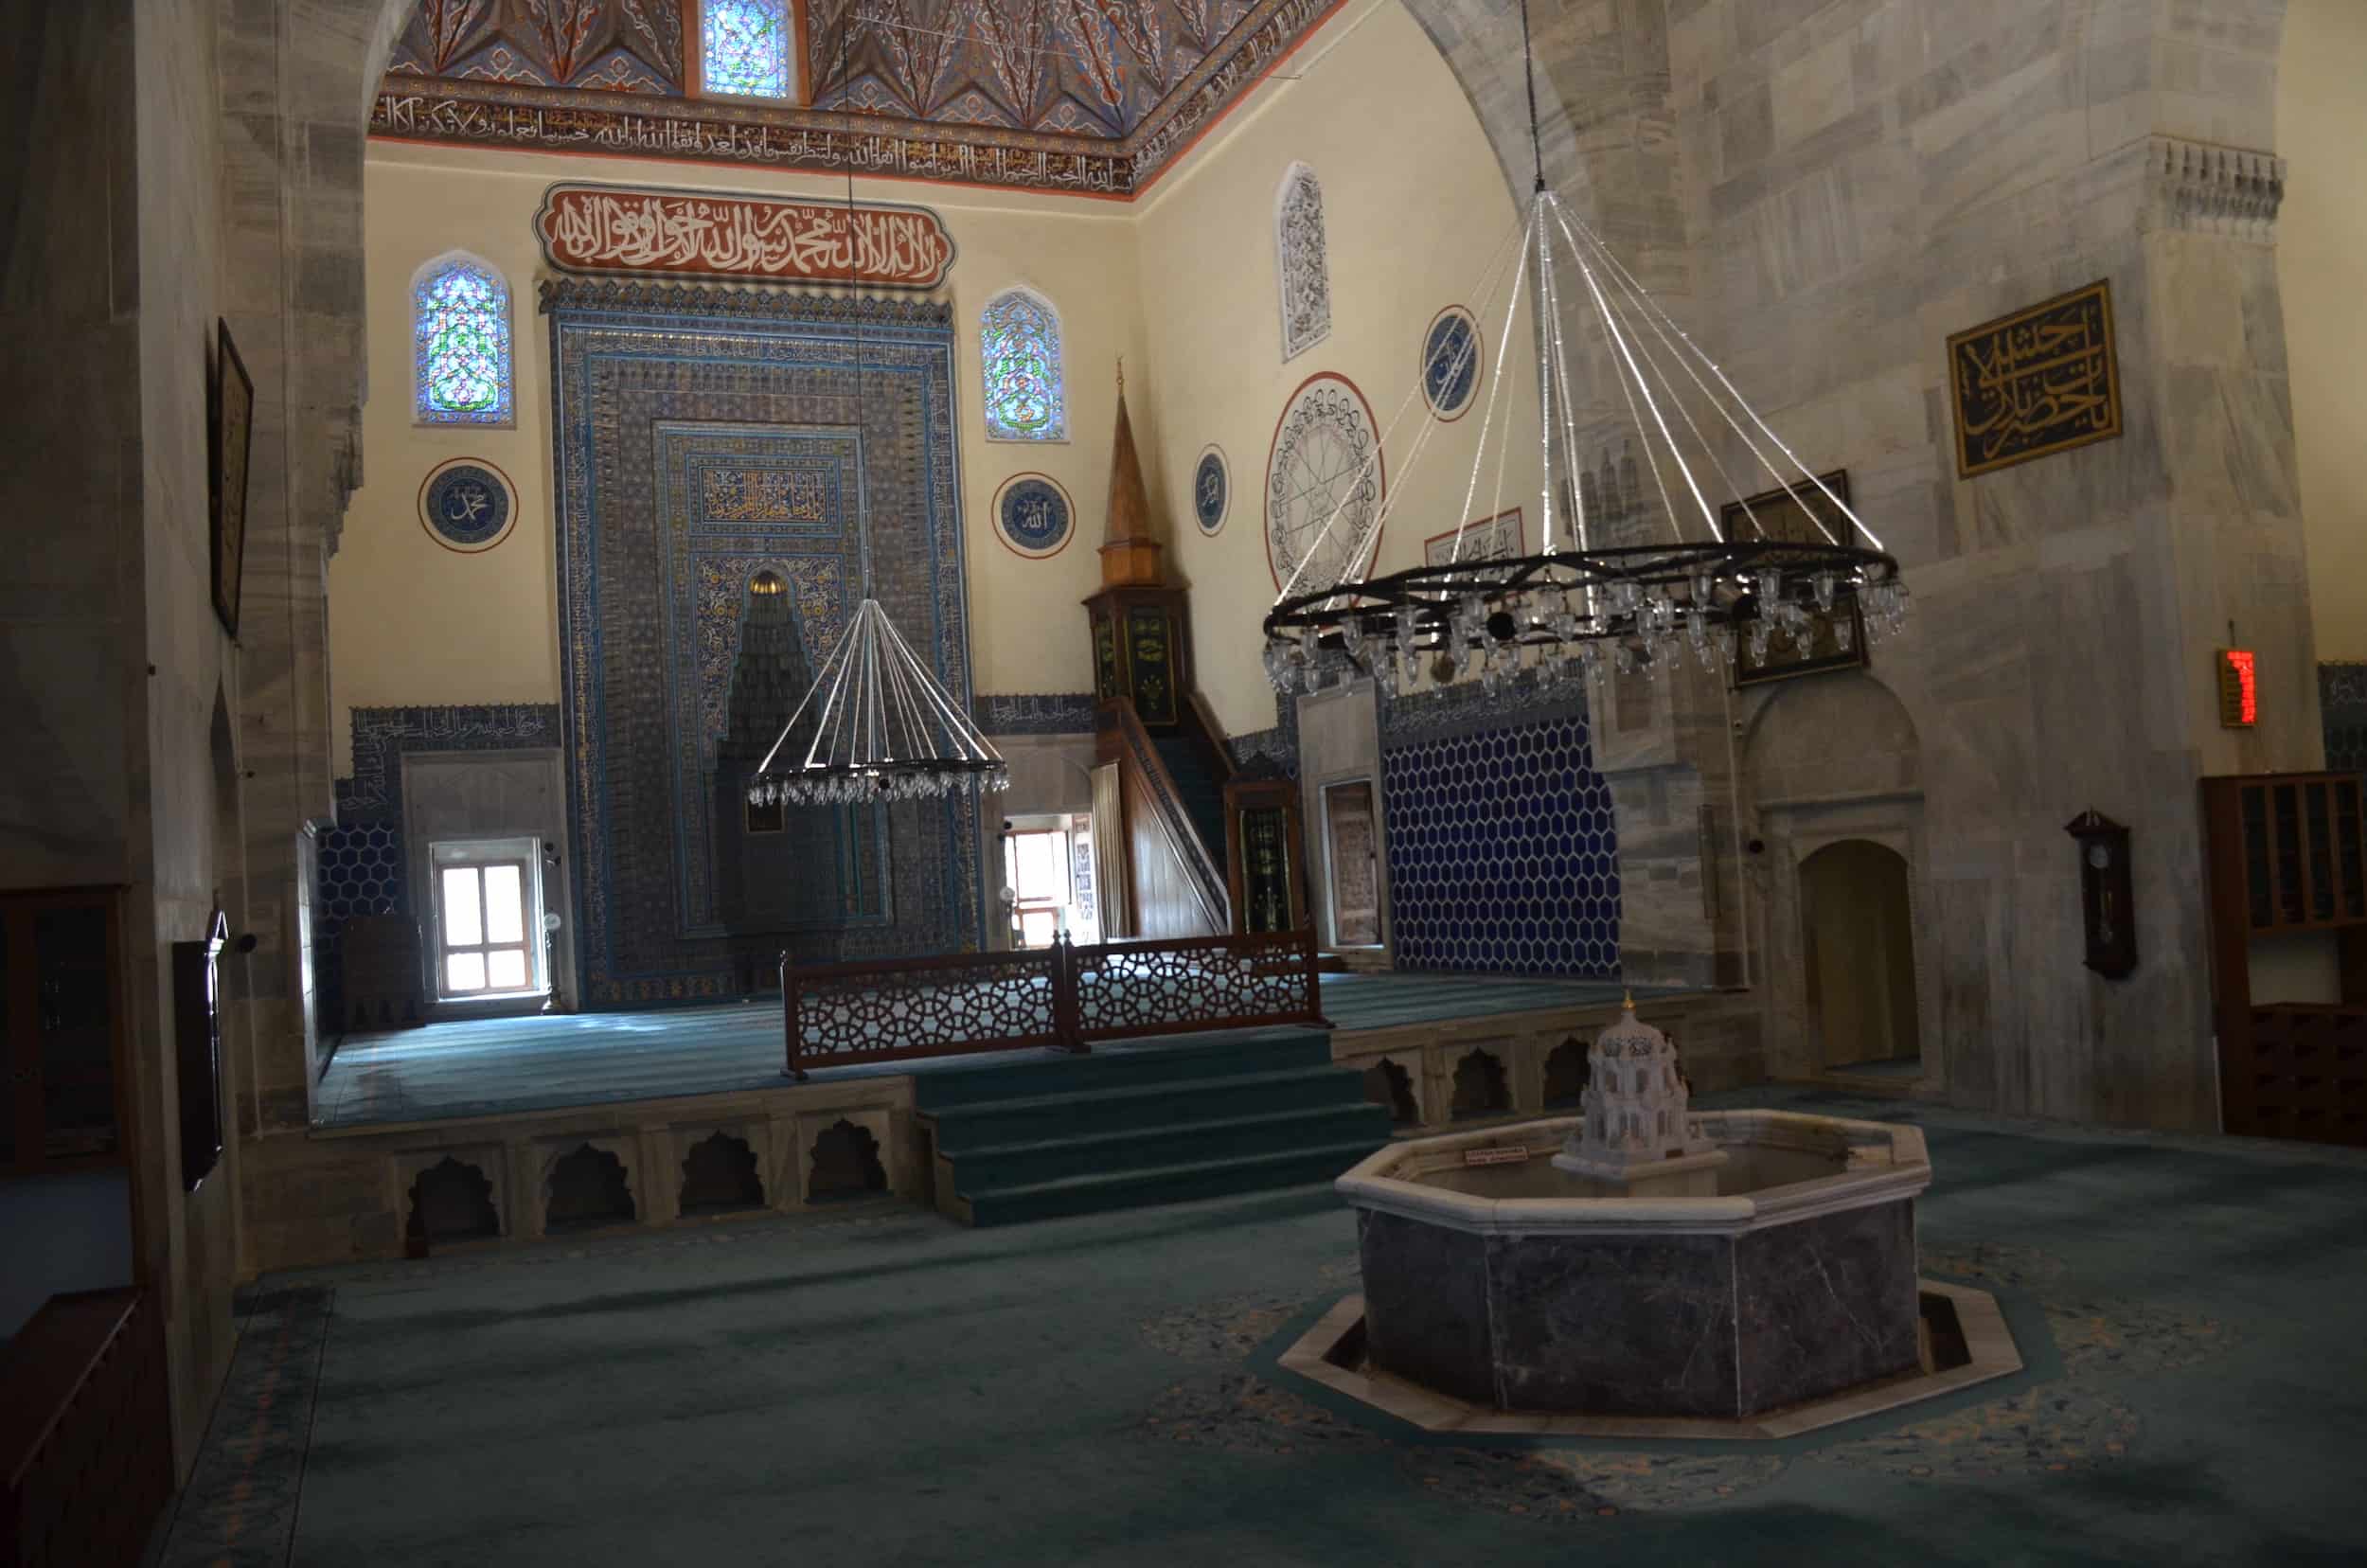 Prayer hall from the left at the Green Mosque in Bursa, Turkey